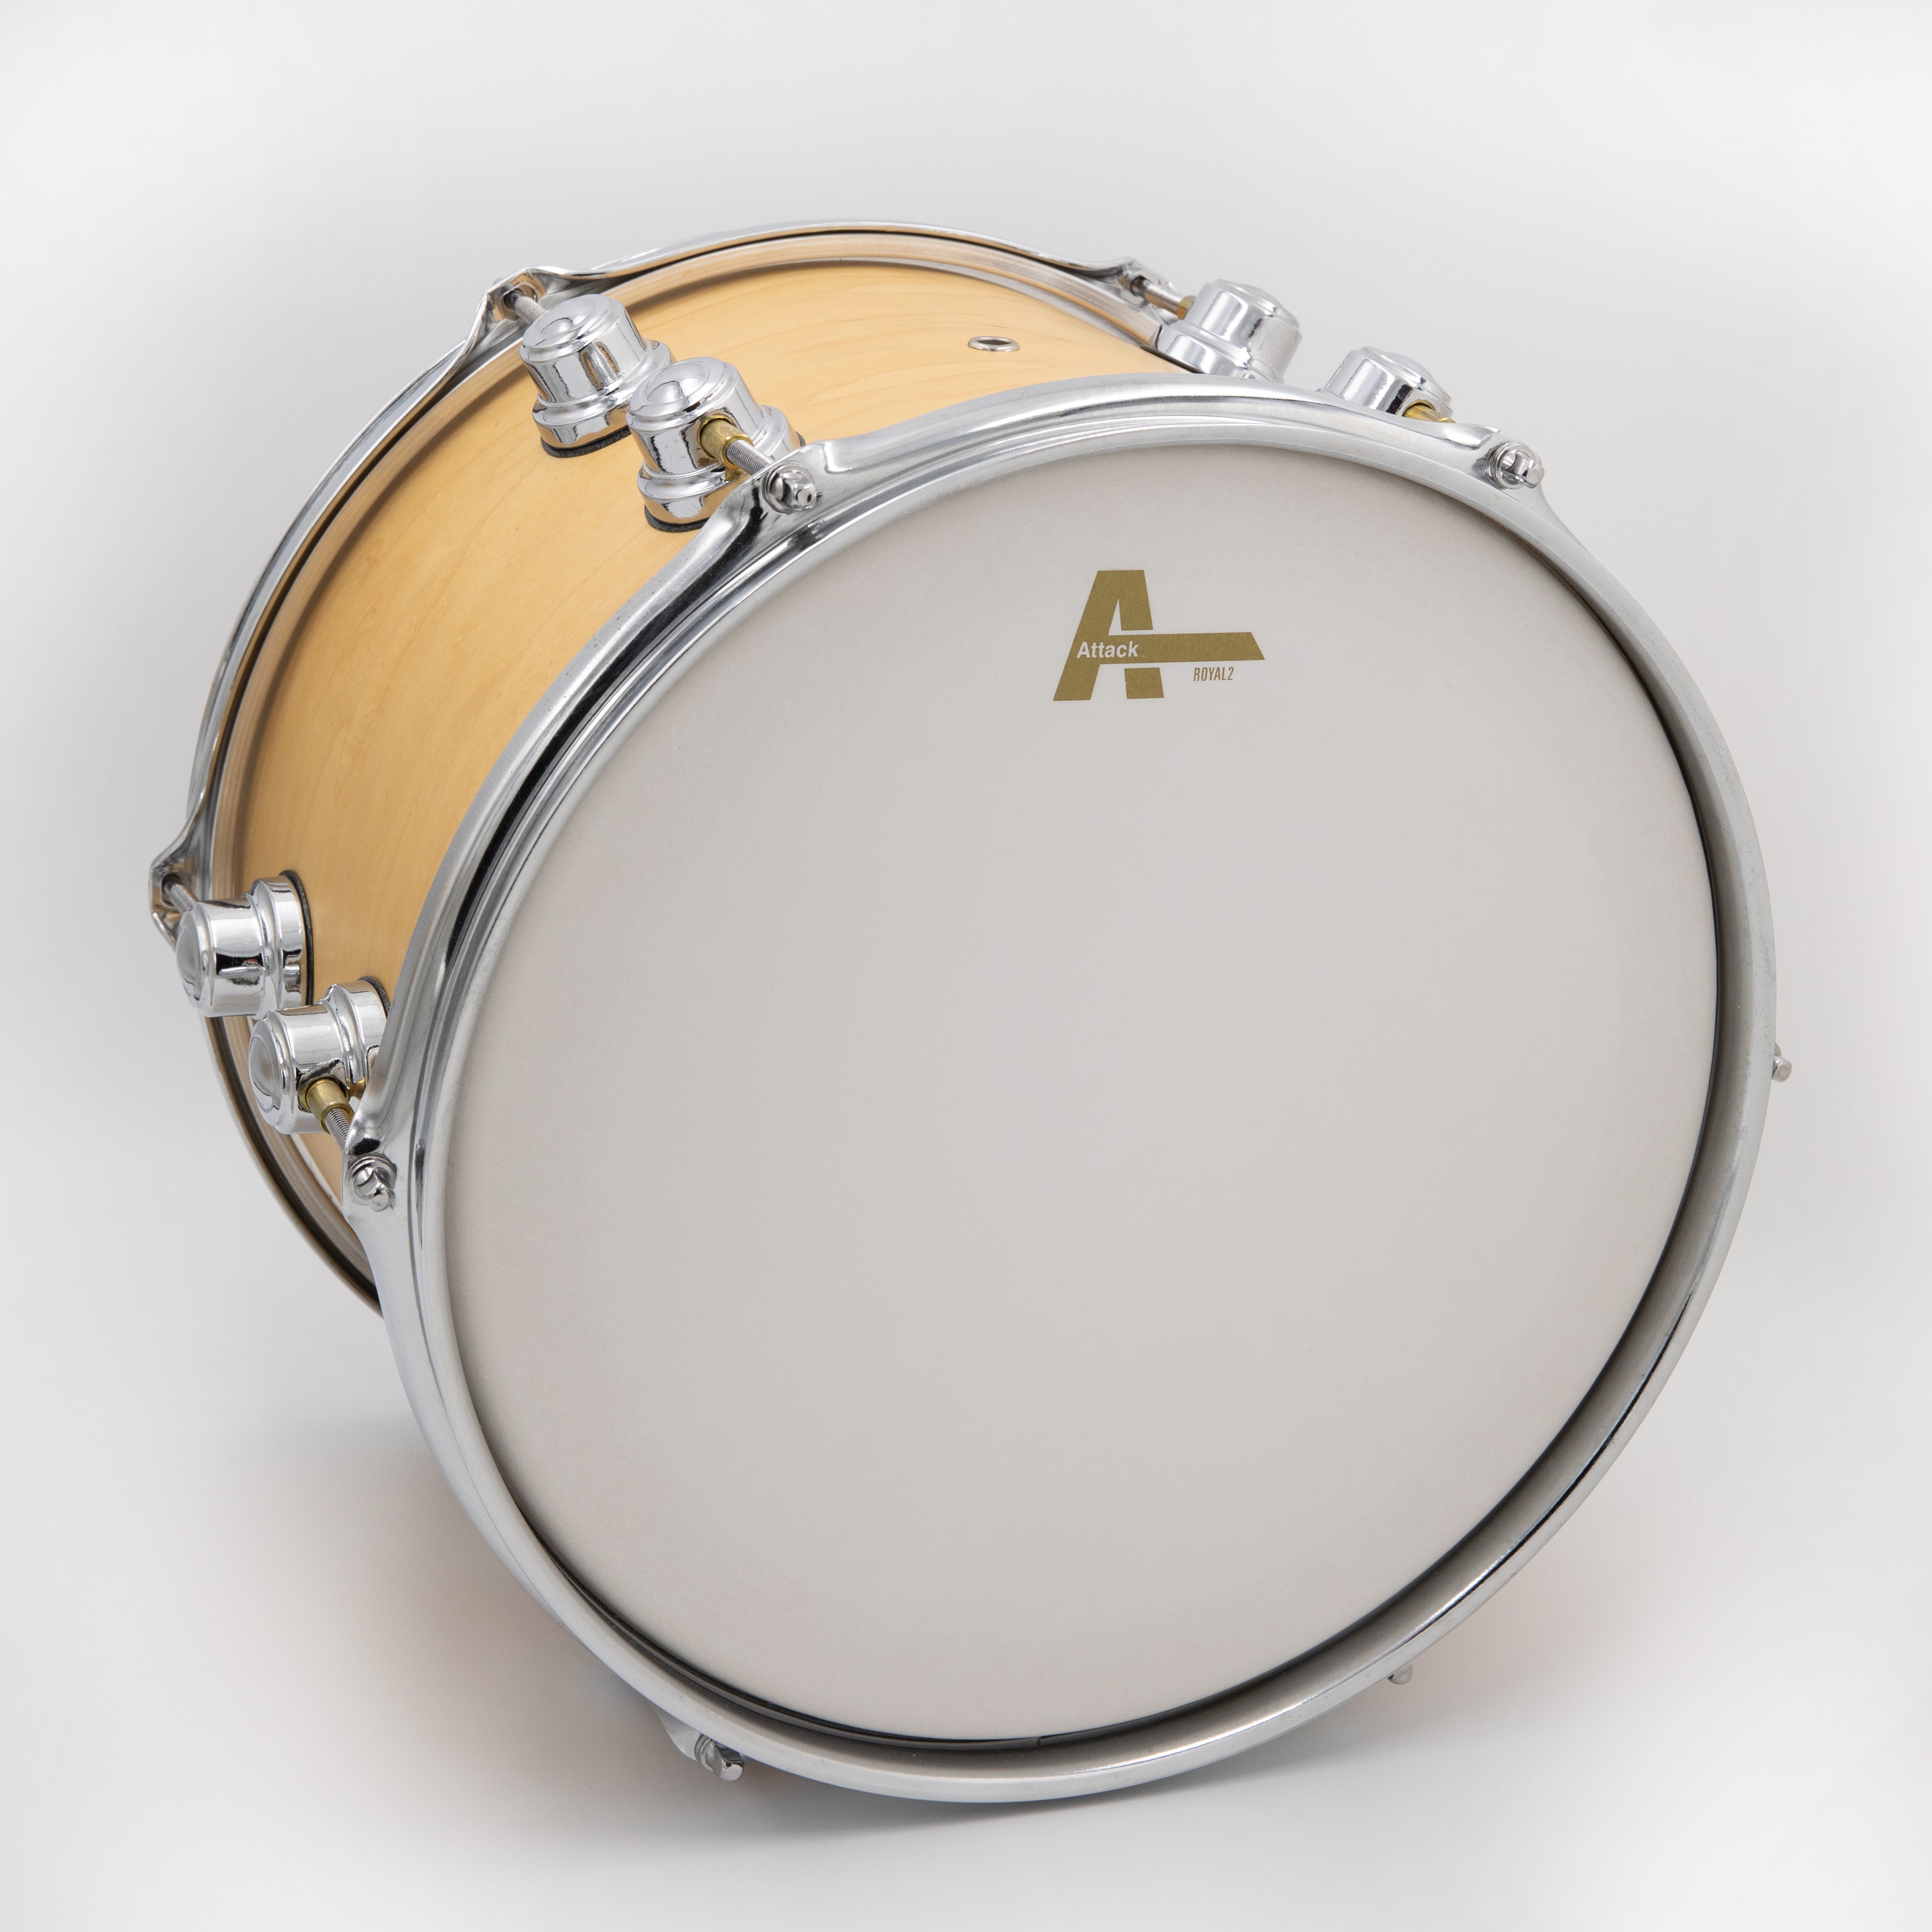 Attack Royal 2 10" 2-Ply Medium Clear S Film Drumhead - Coated